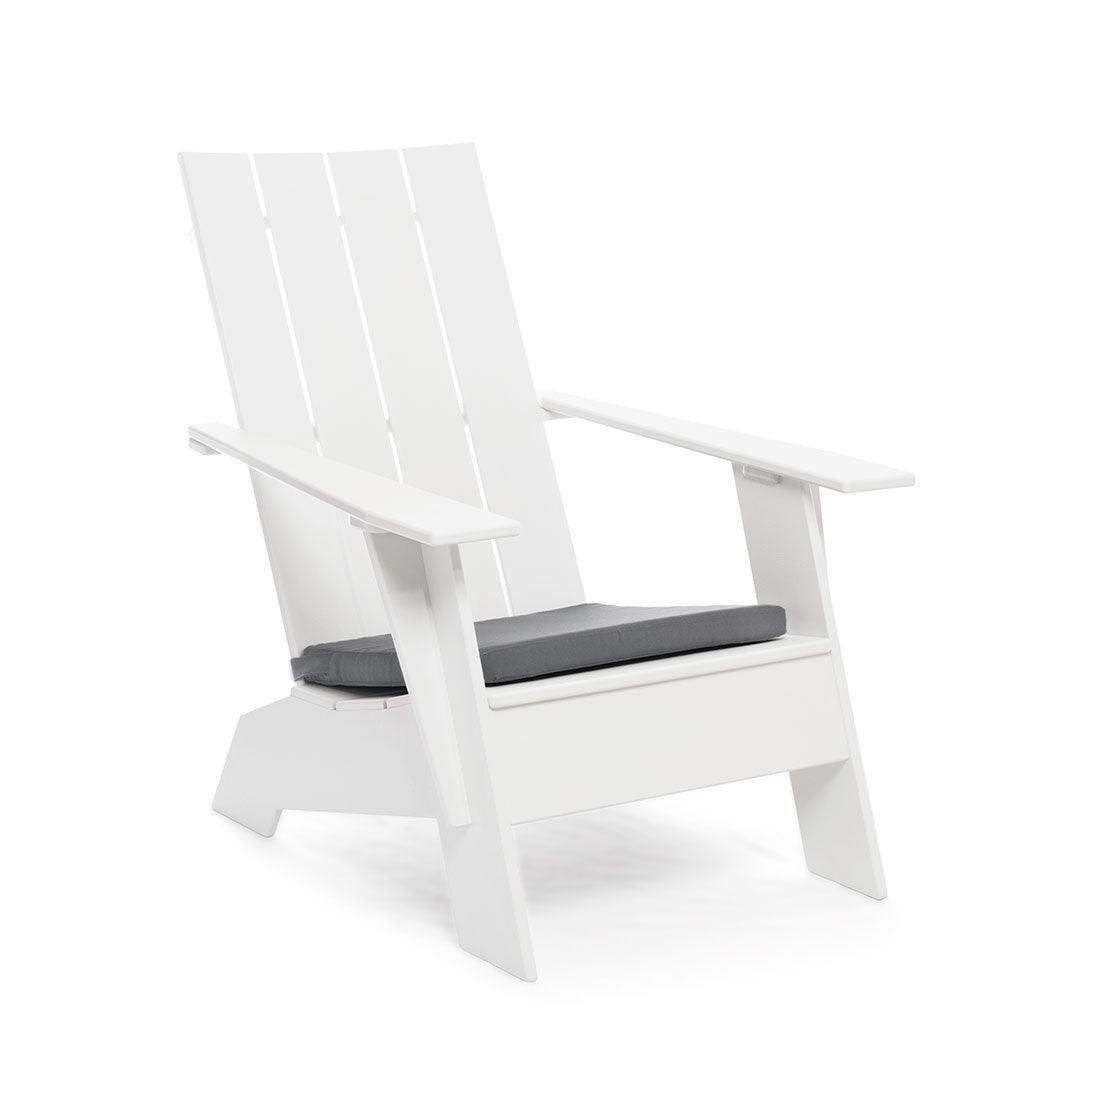 Loll Designs Adirondack Chairs with Seat Cushions Bundle, Overstock - Default Title